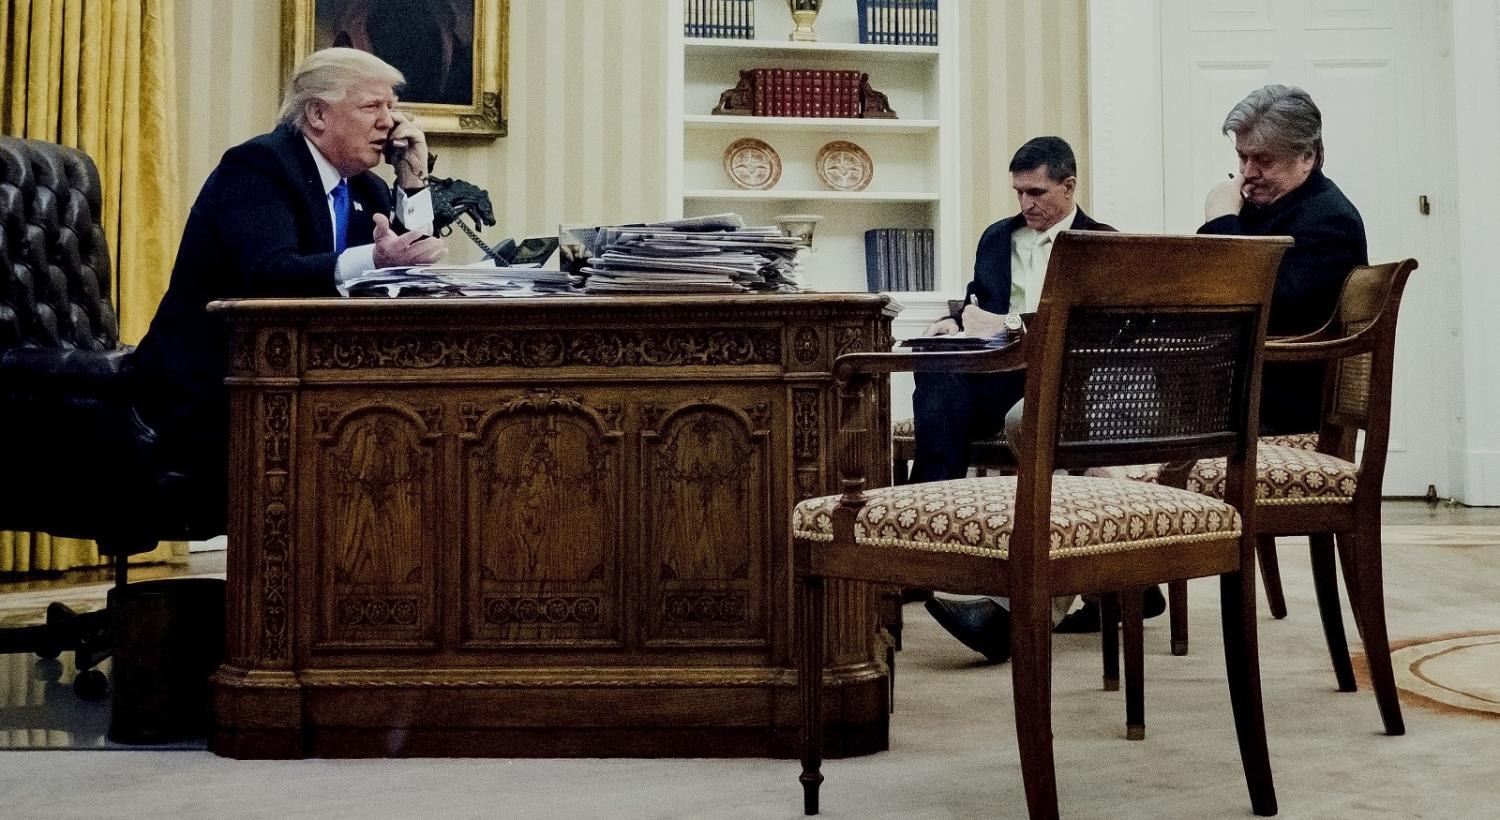 US President Donald Trump on the phone with Malcolm Turnbull on 28 January. (Photo: Pete Marovich/Getty Images)